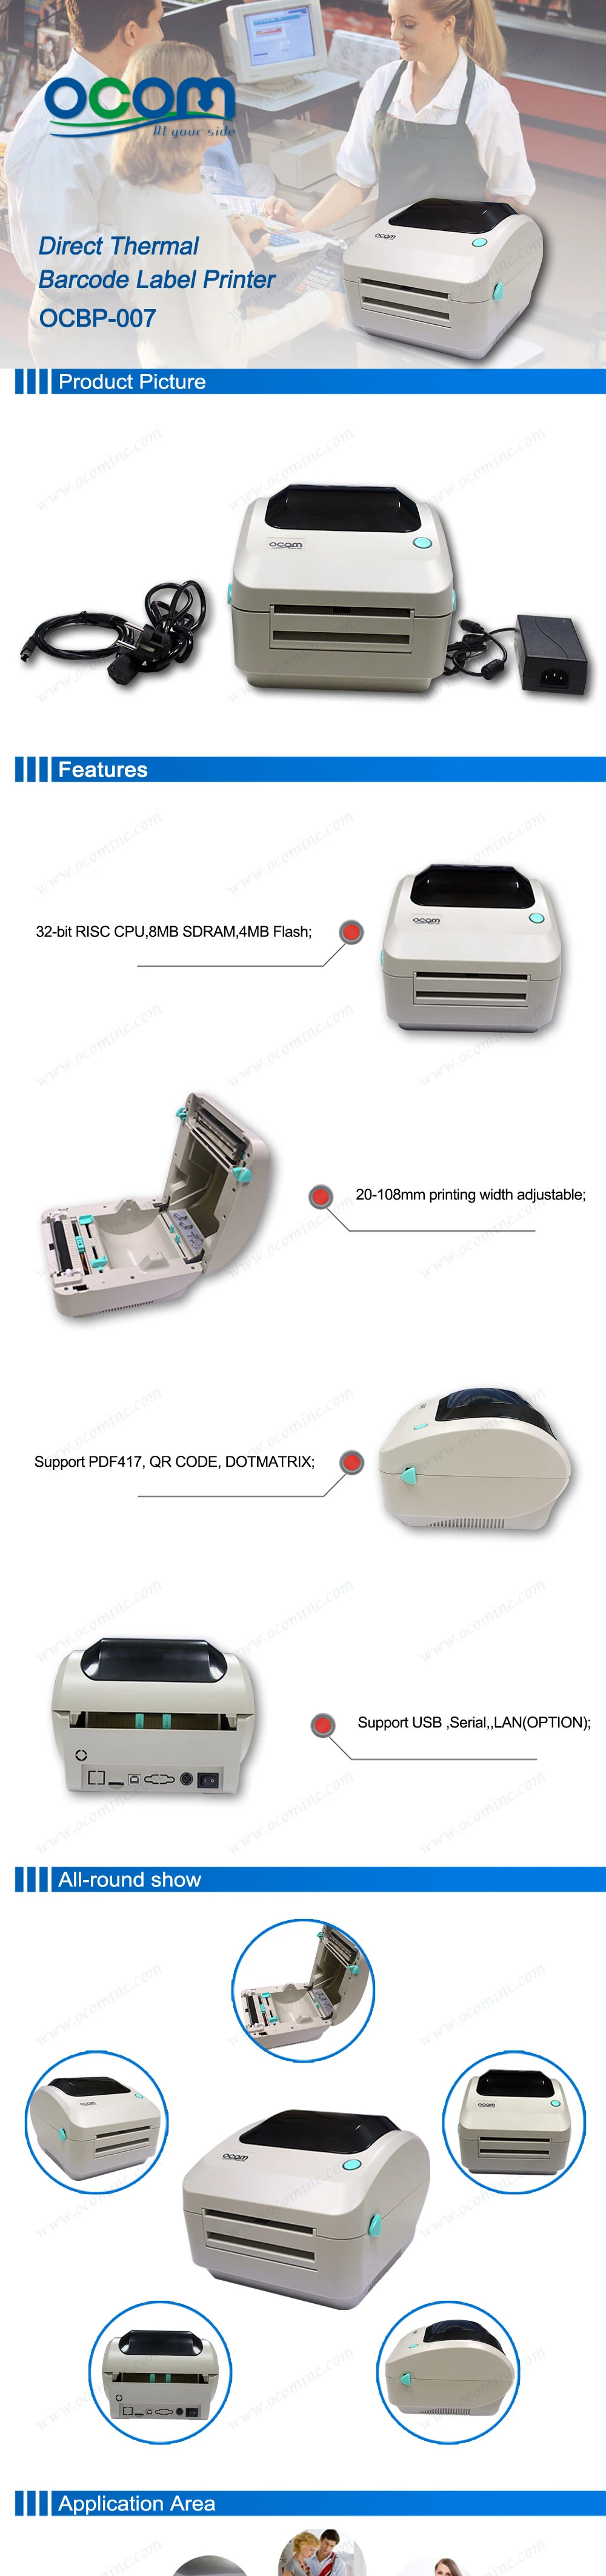 4 Inch Direct Thermal Barcode Label Printer for Sale